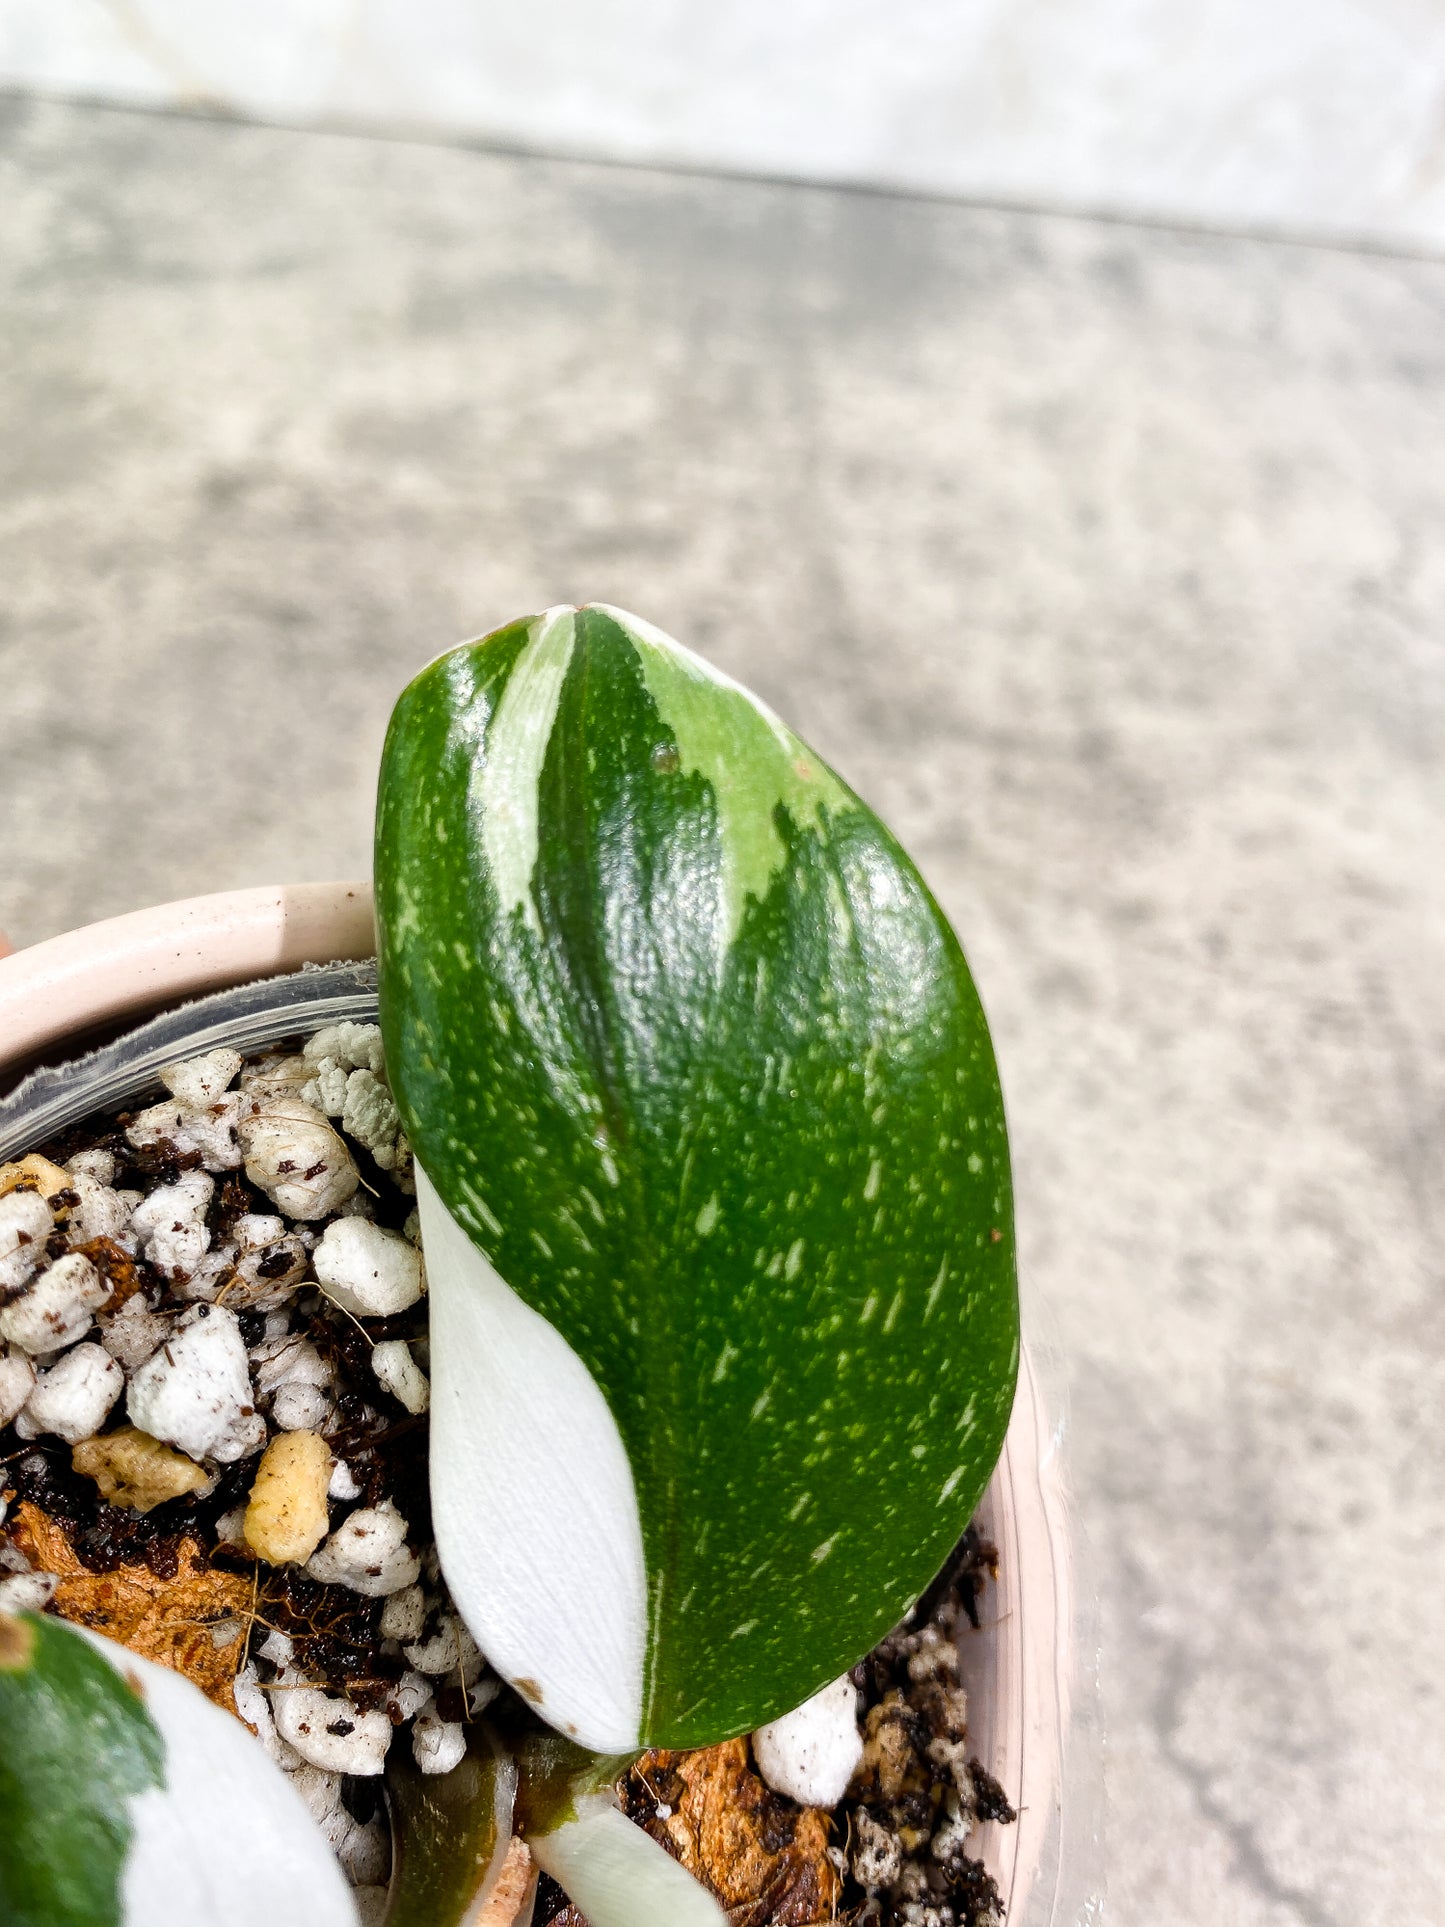 Philodendron white knight tricolor 2 leaves 1 unfurling leaf Slightly Rooted